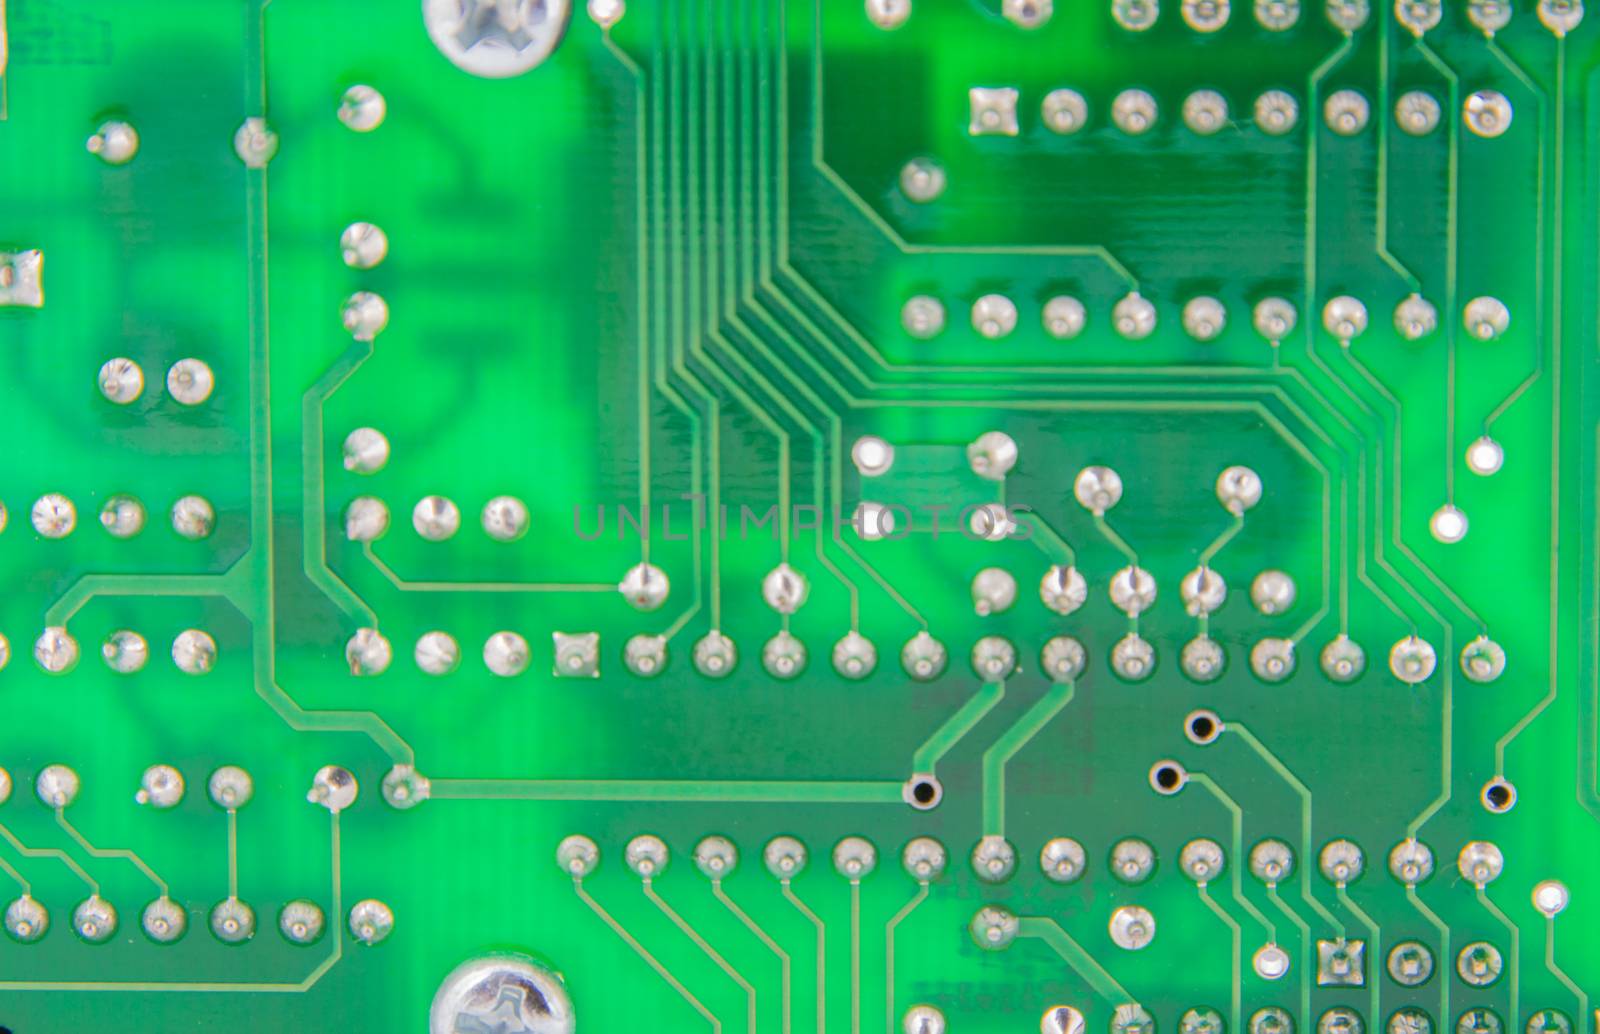 The bottom finished Solder electronics PCB by peerapixs